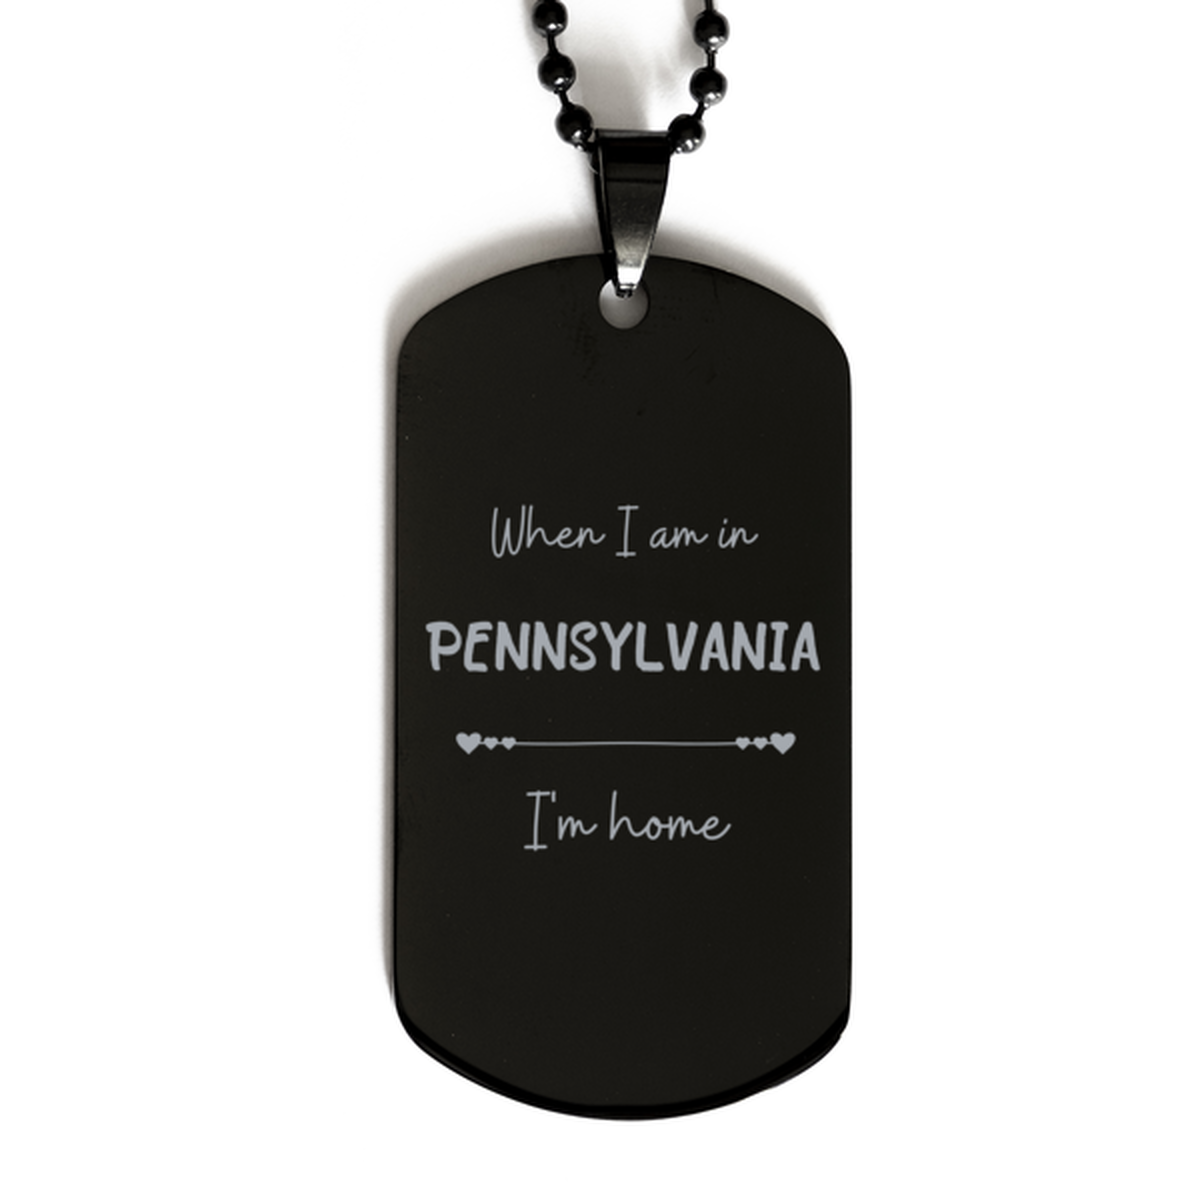 When I am in Pennsylvania I'm home Black Dog Tag, Cheap Gifts For Pennsylvania, State Pennsylvania Birthday Gifts for Friends Coworker